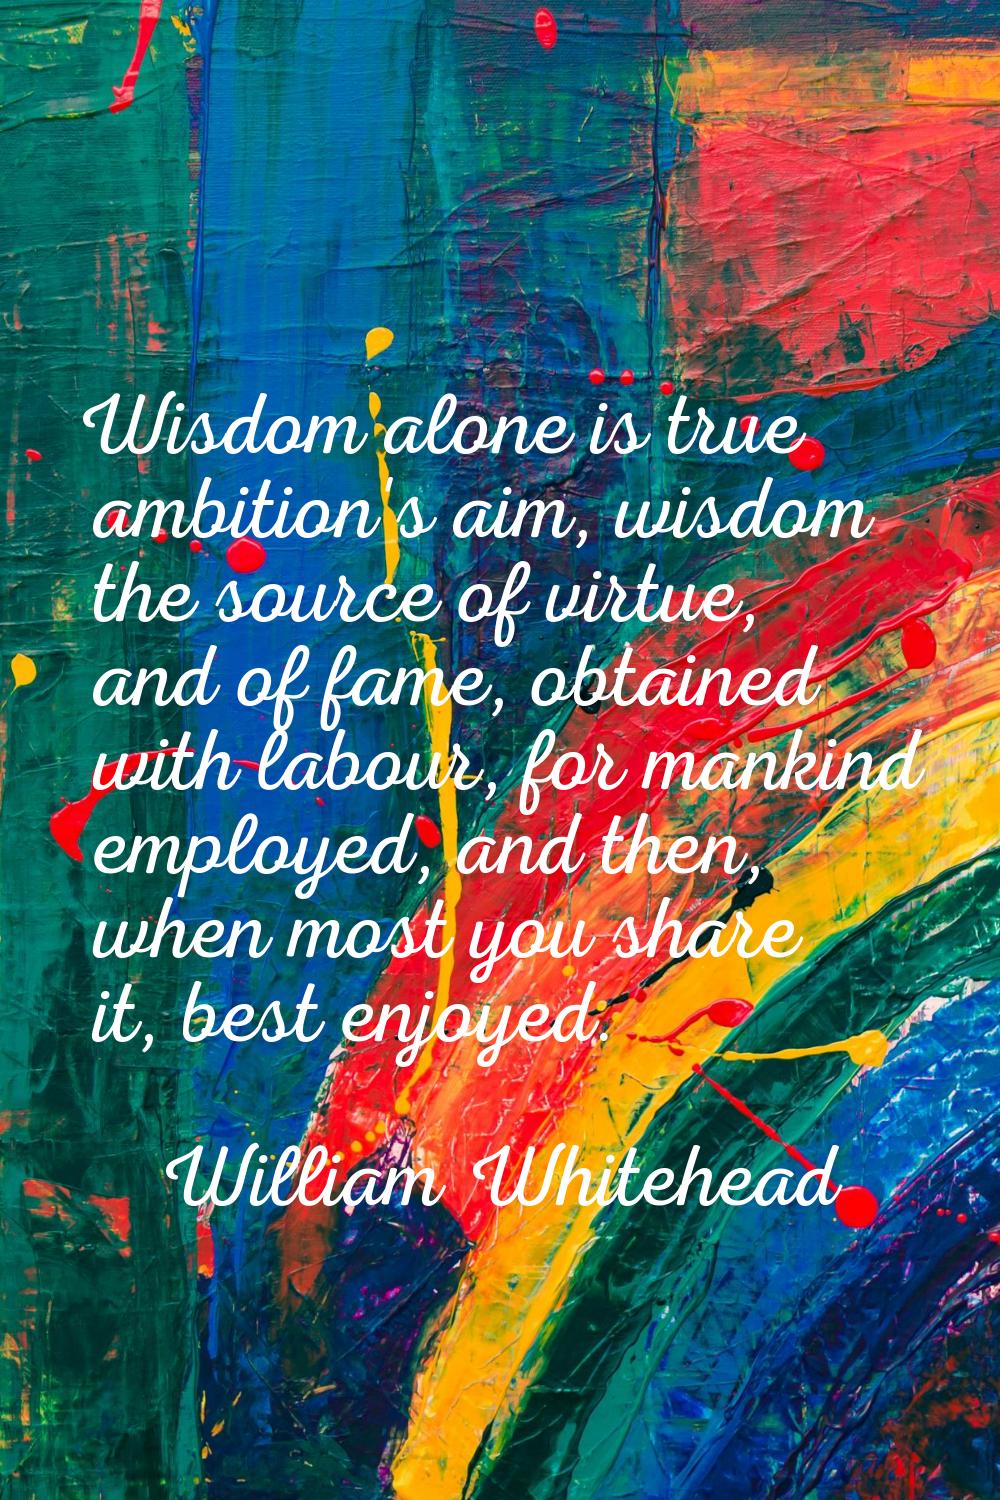 Wisdom alone is true ambition's aim, wisdom the source of virtue, and of fame, obtained with labour